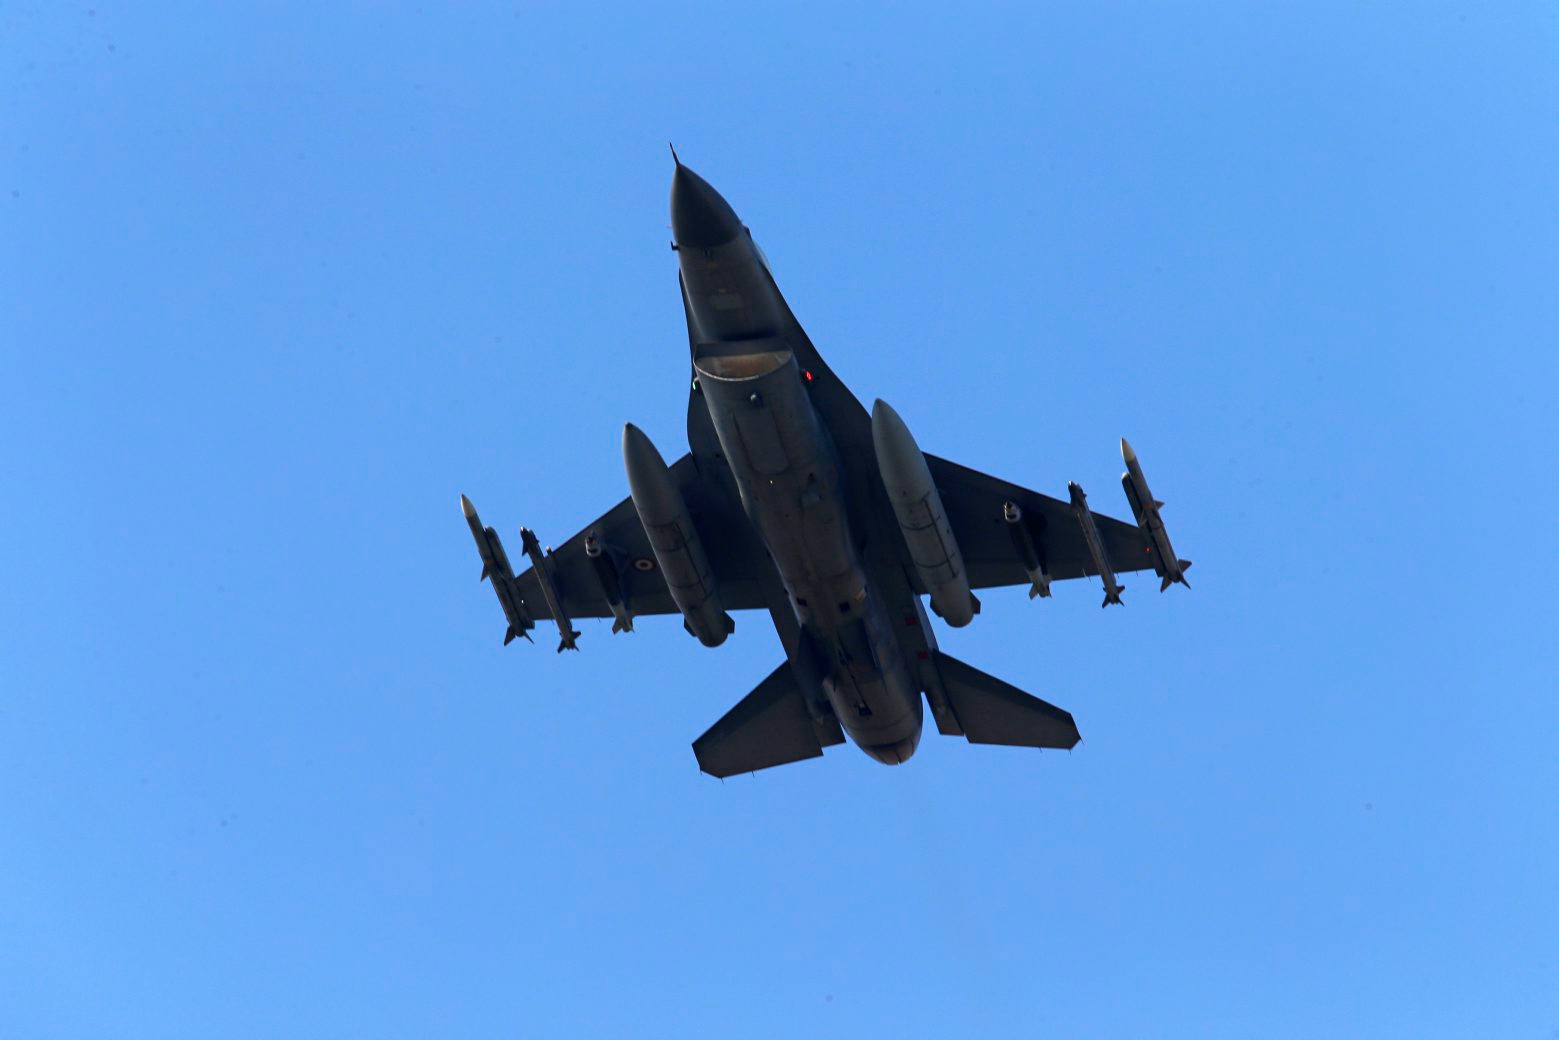 FILE -- In this July 29, 2015 file photo, a Turkish Air Force warplane rises in the sky after taking off from Incirlik Air Base, in Adana, southern Turkey. On Tuesday, April 25, 2017, Turkish warplanes carried out airstrikes against suspected Kurdish rebel positions in northern Iraq and in northeastern Syria, the military said, in a bid to prevent militants from smuggling fighters and weapons into Turkey. Although Turkey regularly carries out airstrikes against outlawed Kurdistan Workers' Party, or PKK targets in northern Iraq, this was the first time it has struck the Sinjar region. (AP Photo/Emrah Gurel, File) Syria